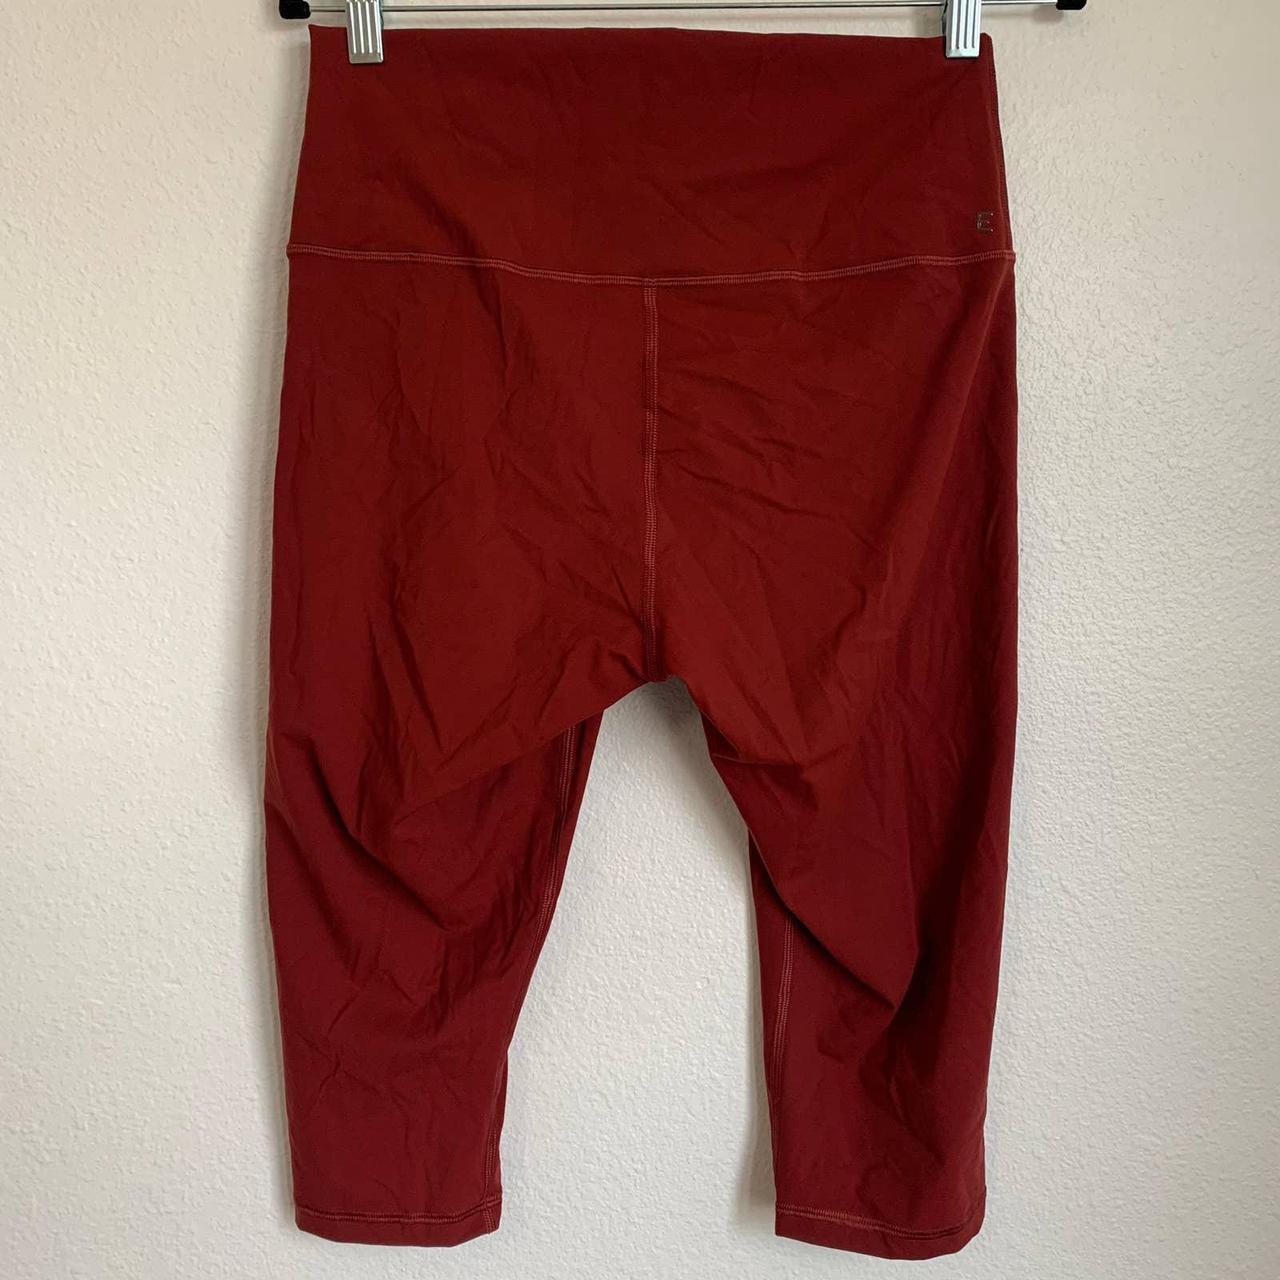 NWT Everlane The Perform Cropped Legging in Wild - Depop